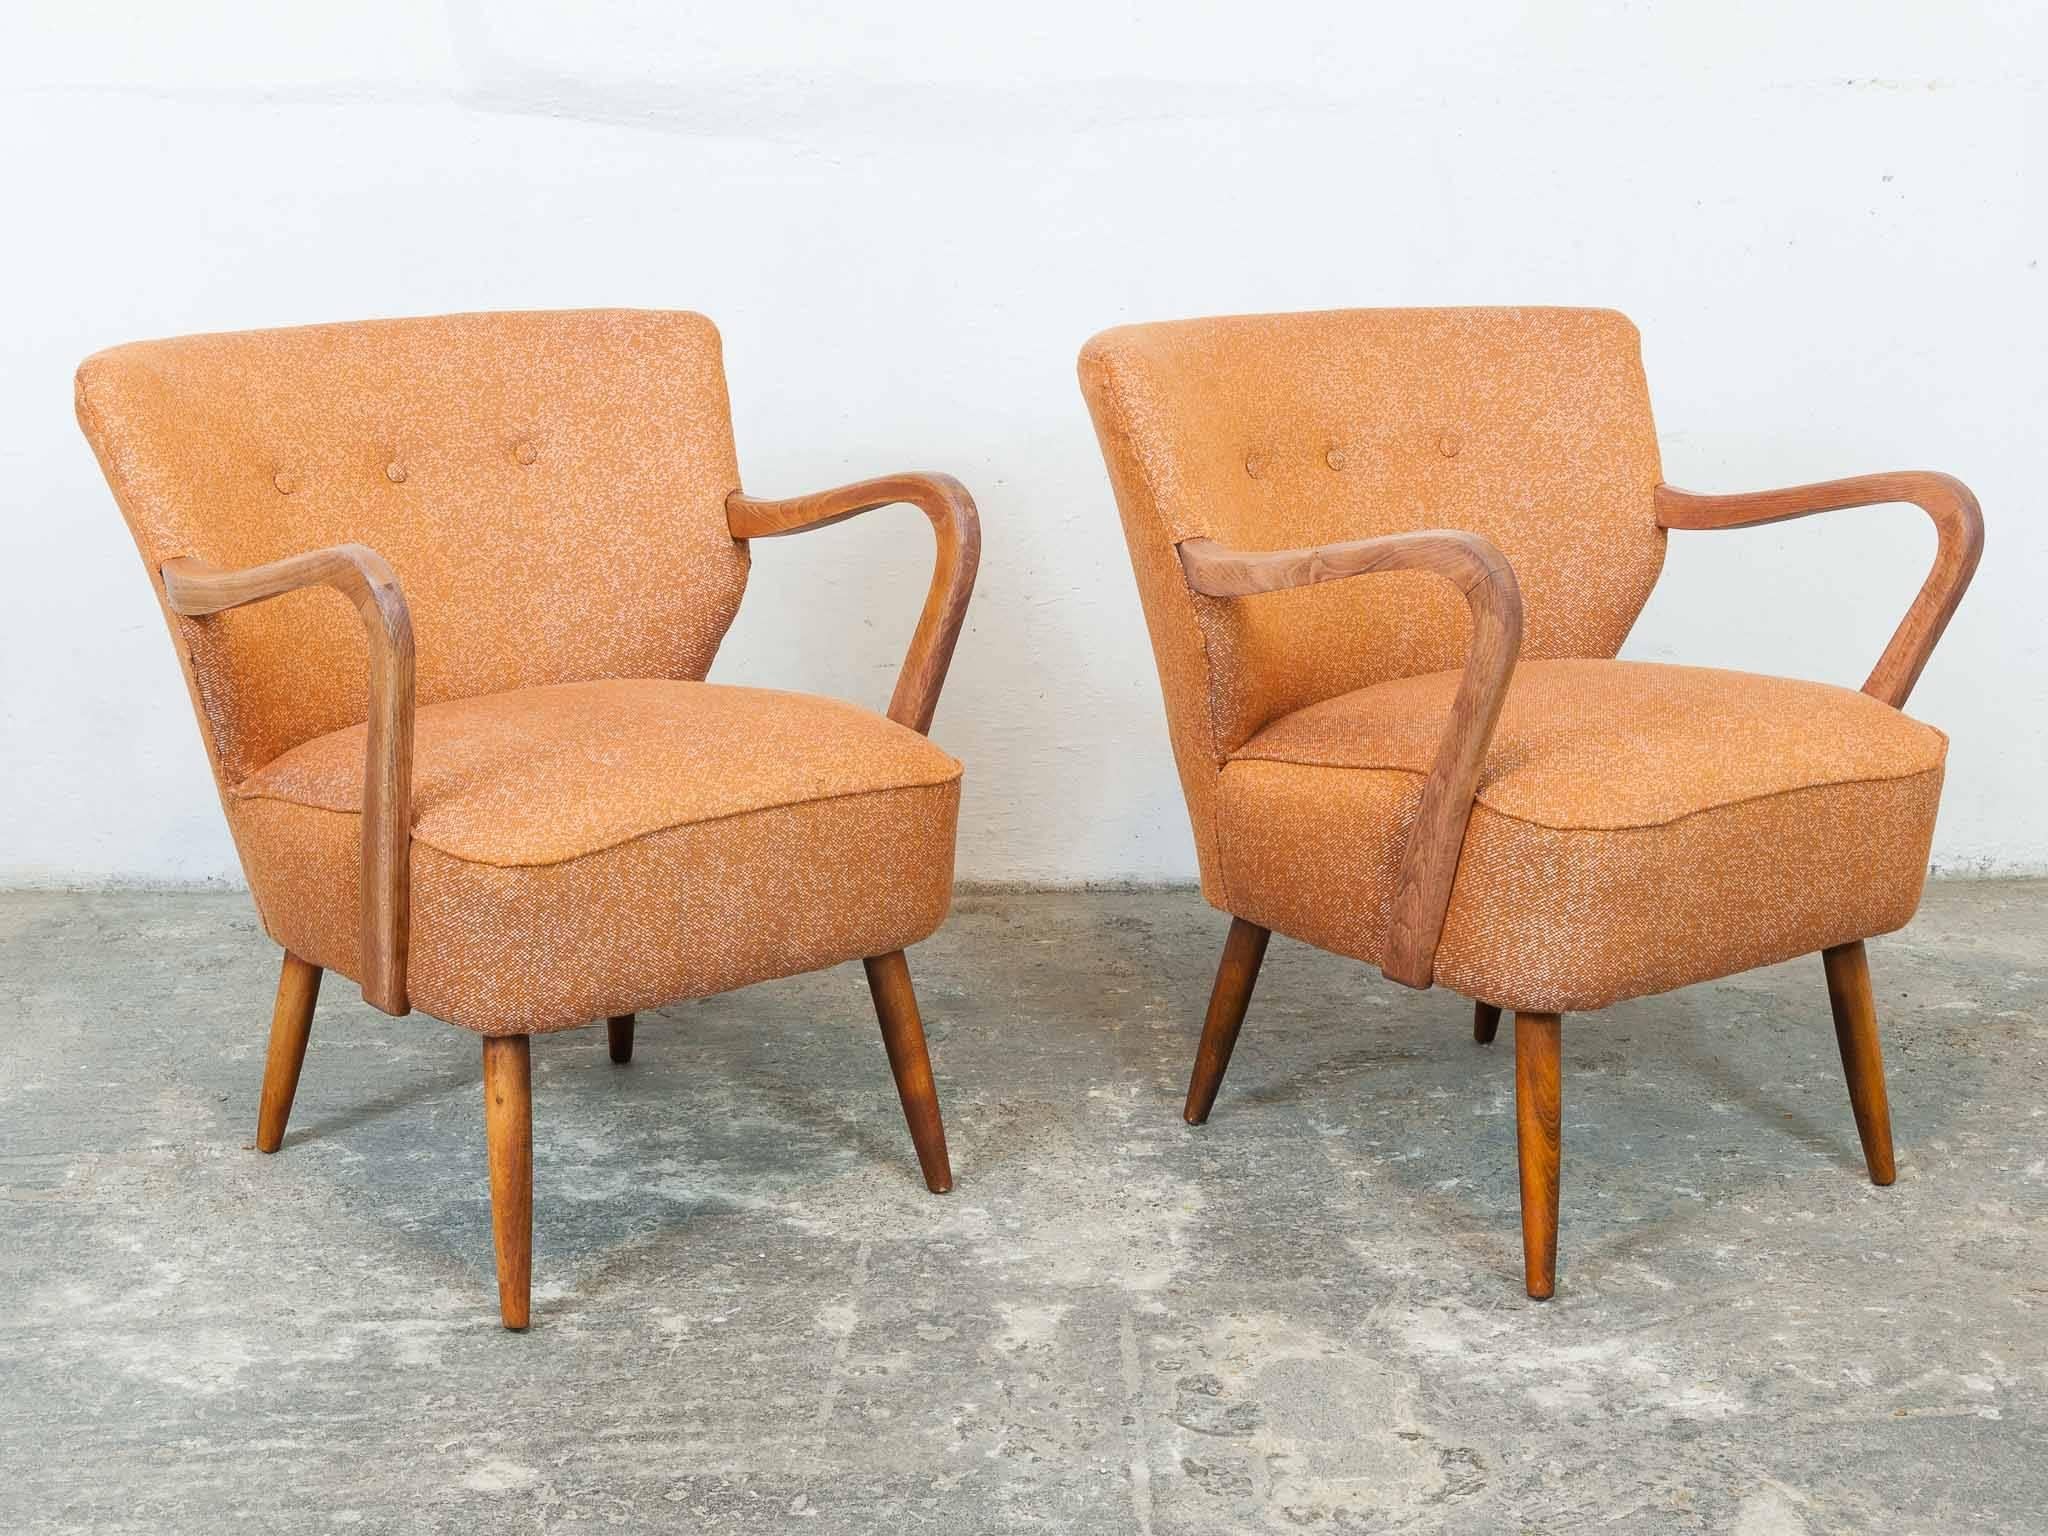 Pair of 1940s Vintage Midcentury Cocktail Chairs in Astro Orange Fabric 1